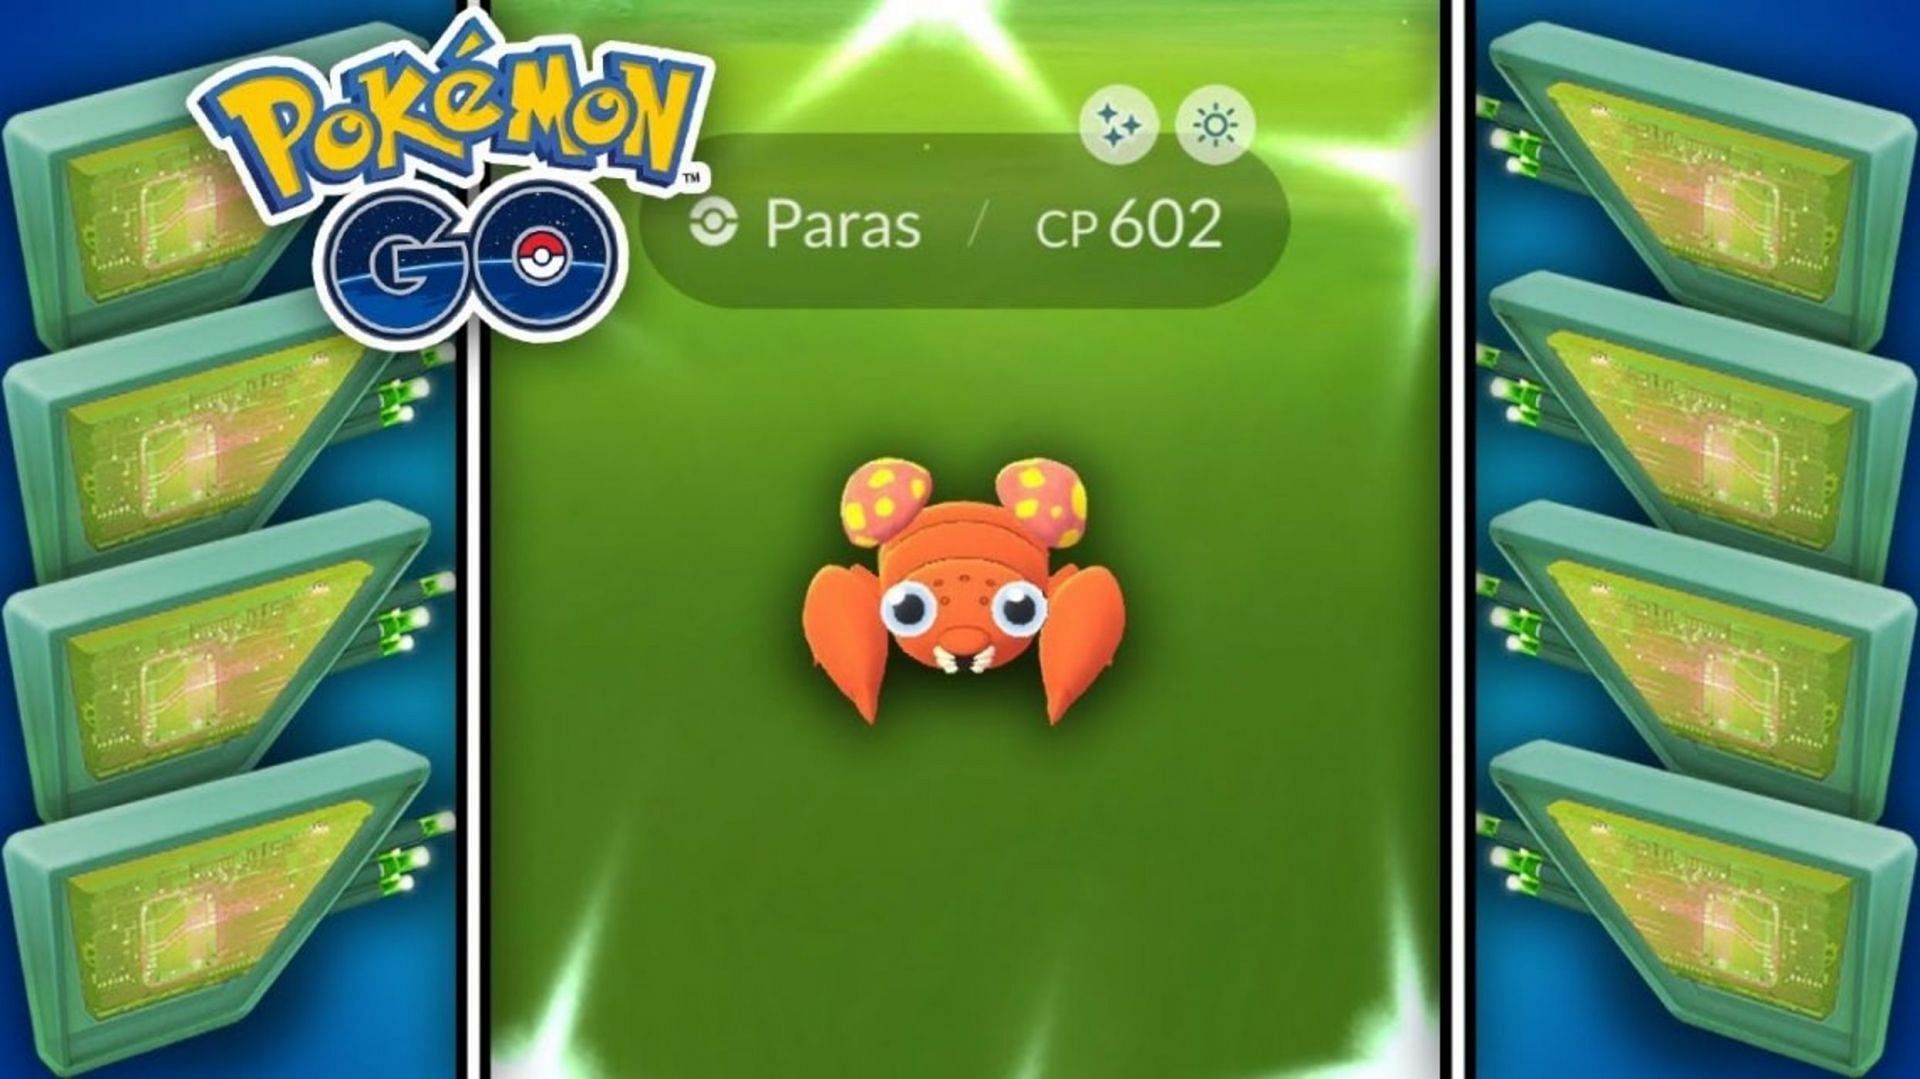 Paras is a Bug/Grass-type Pokemon originally from Generation I (Image via TechBriefly)